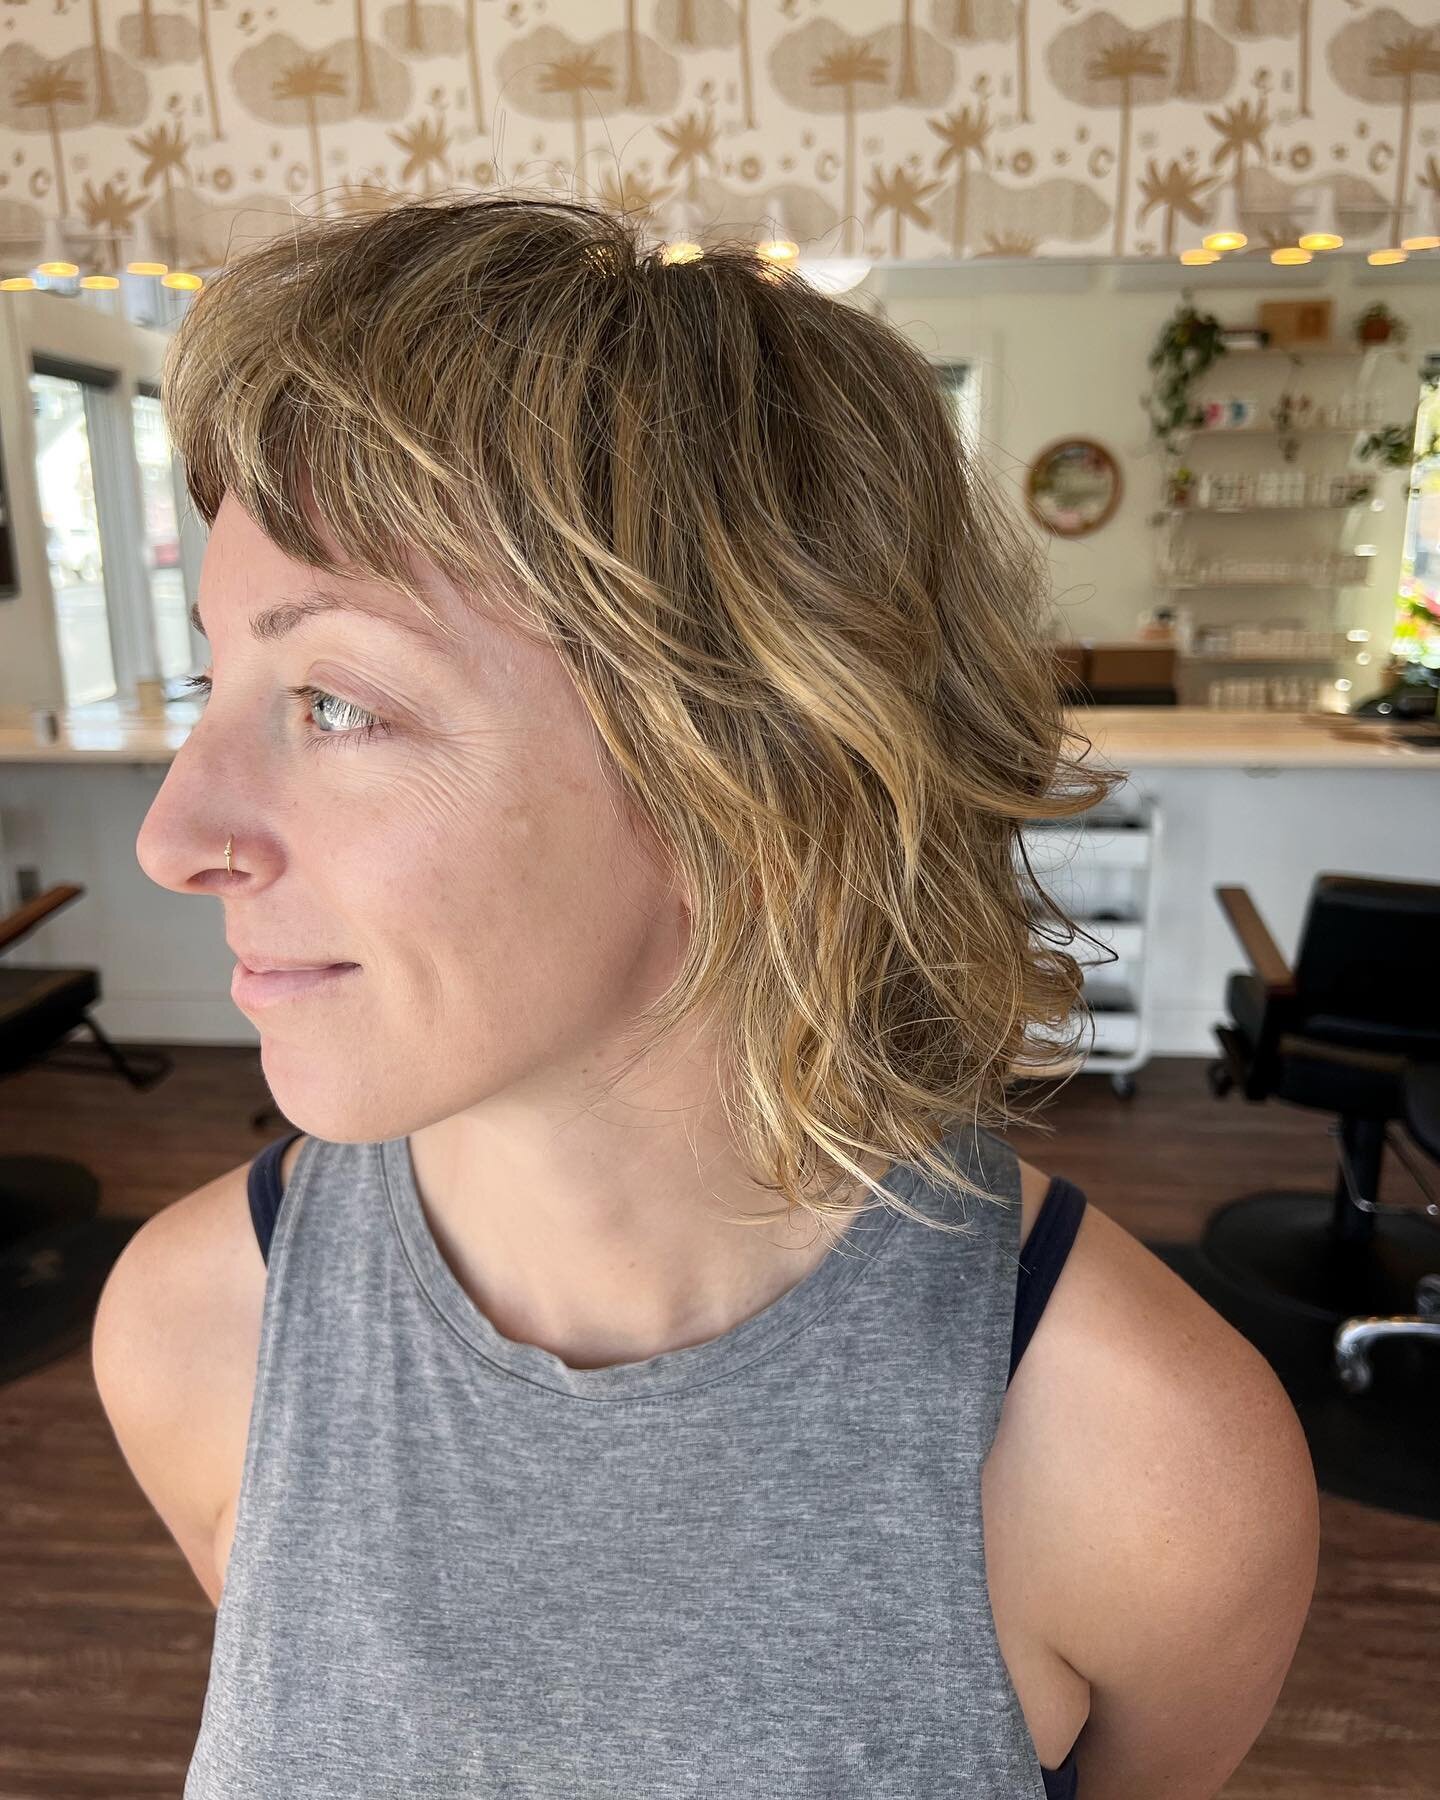 Open-air hand-painted highlights and haircut by Kelsie @kelsbot , done at Vacation Club
.
.
.
 #vacationclub #vacationclubpdx #portlandsalon #humboldtneighborhood #humboldtportland #portlandsbestsalon #crafthairstyle #pdxhair #portlandhair #portlands